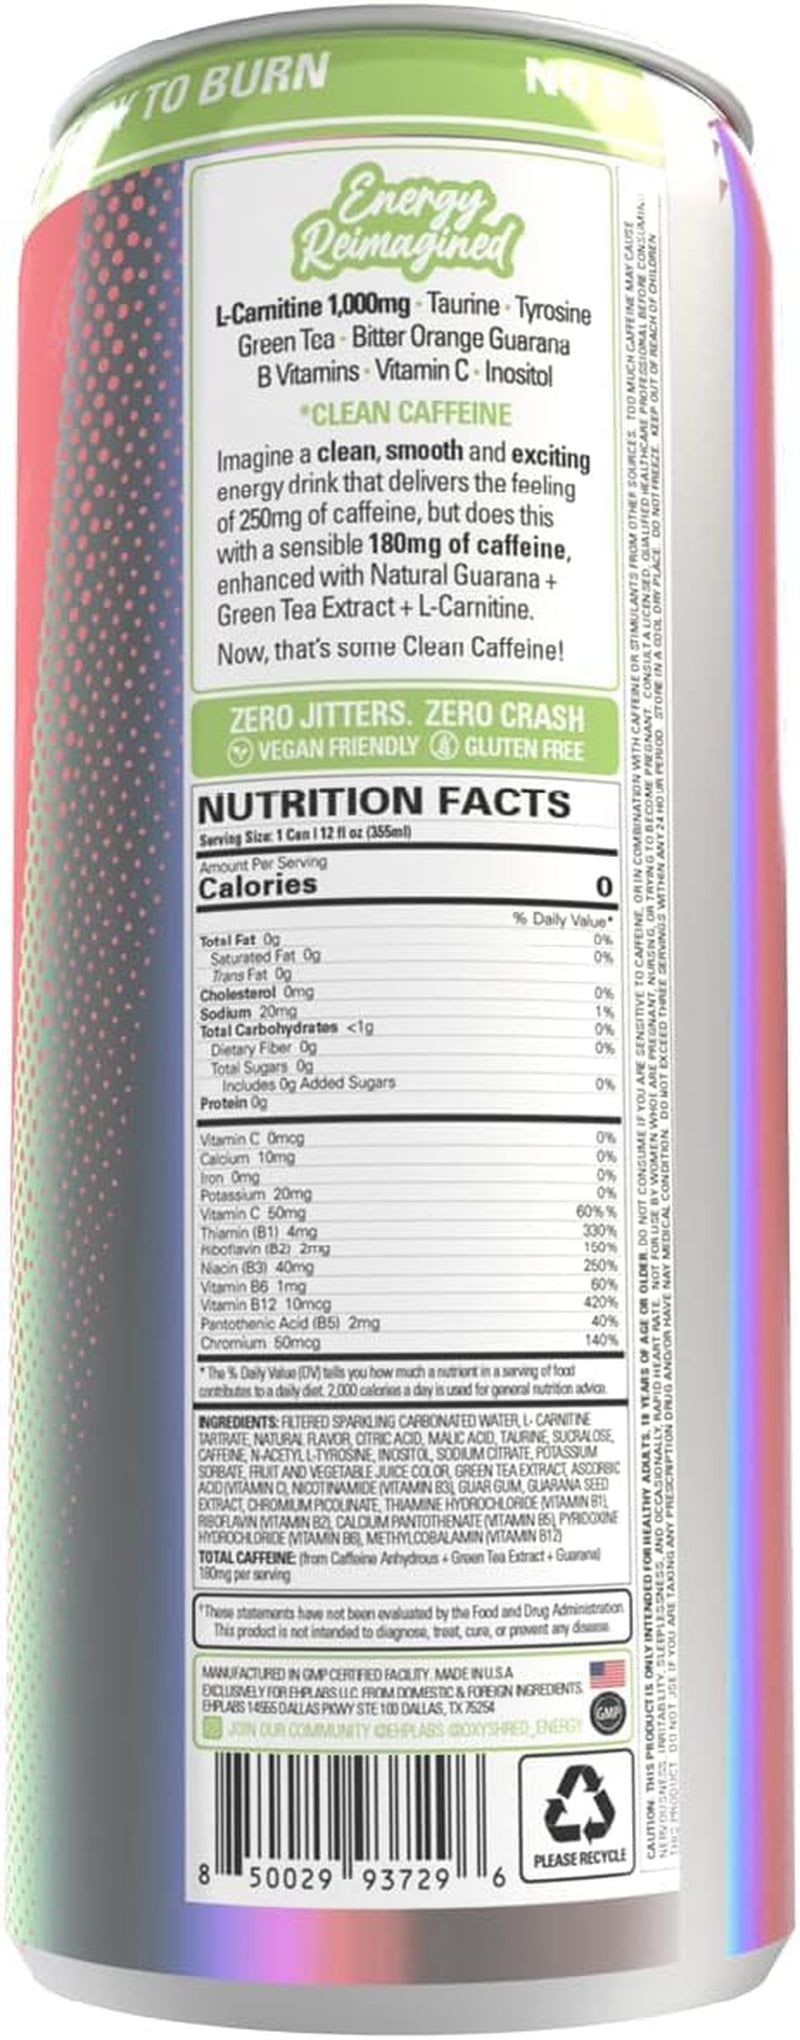 Ehplabs Oxyshred Ultra Energy Drink - Performance Carbonated Healthy Energy Drink with B Vitamins & Amino Acids, Zero Sugar, Zero Carbs & Zero Calories, Natural Clean Caffeine, Guava Paradise (12-Pack)